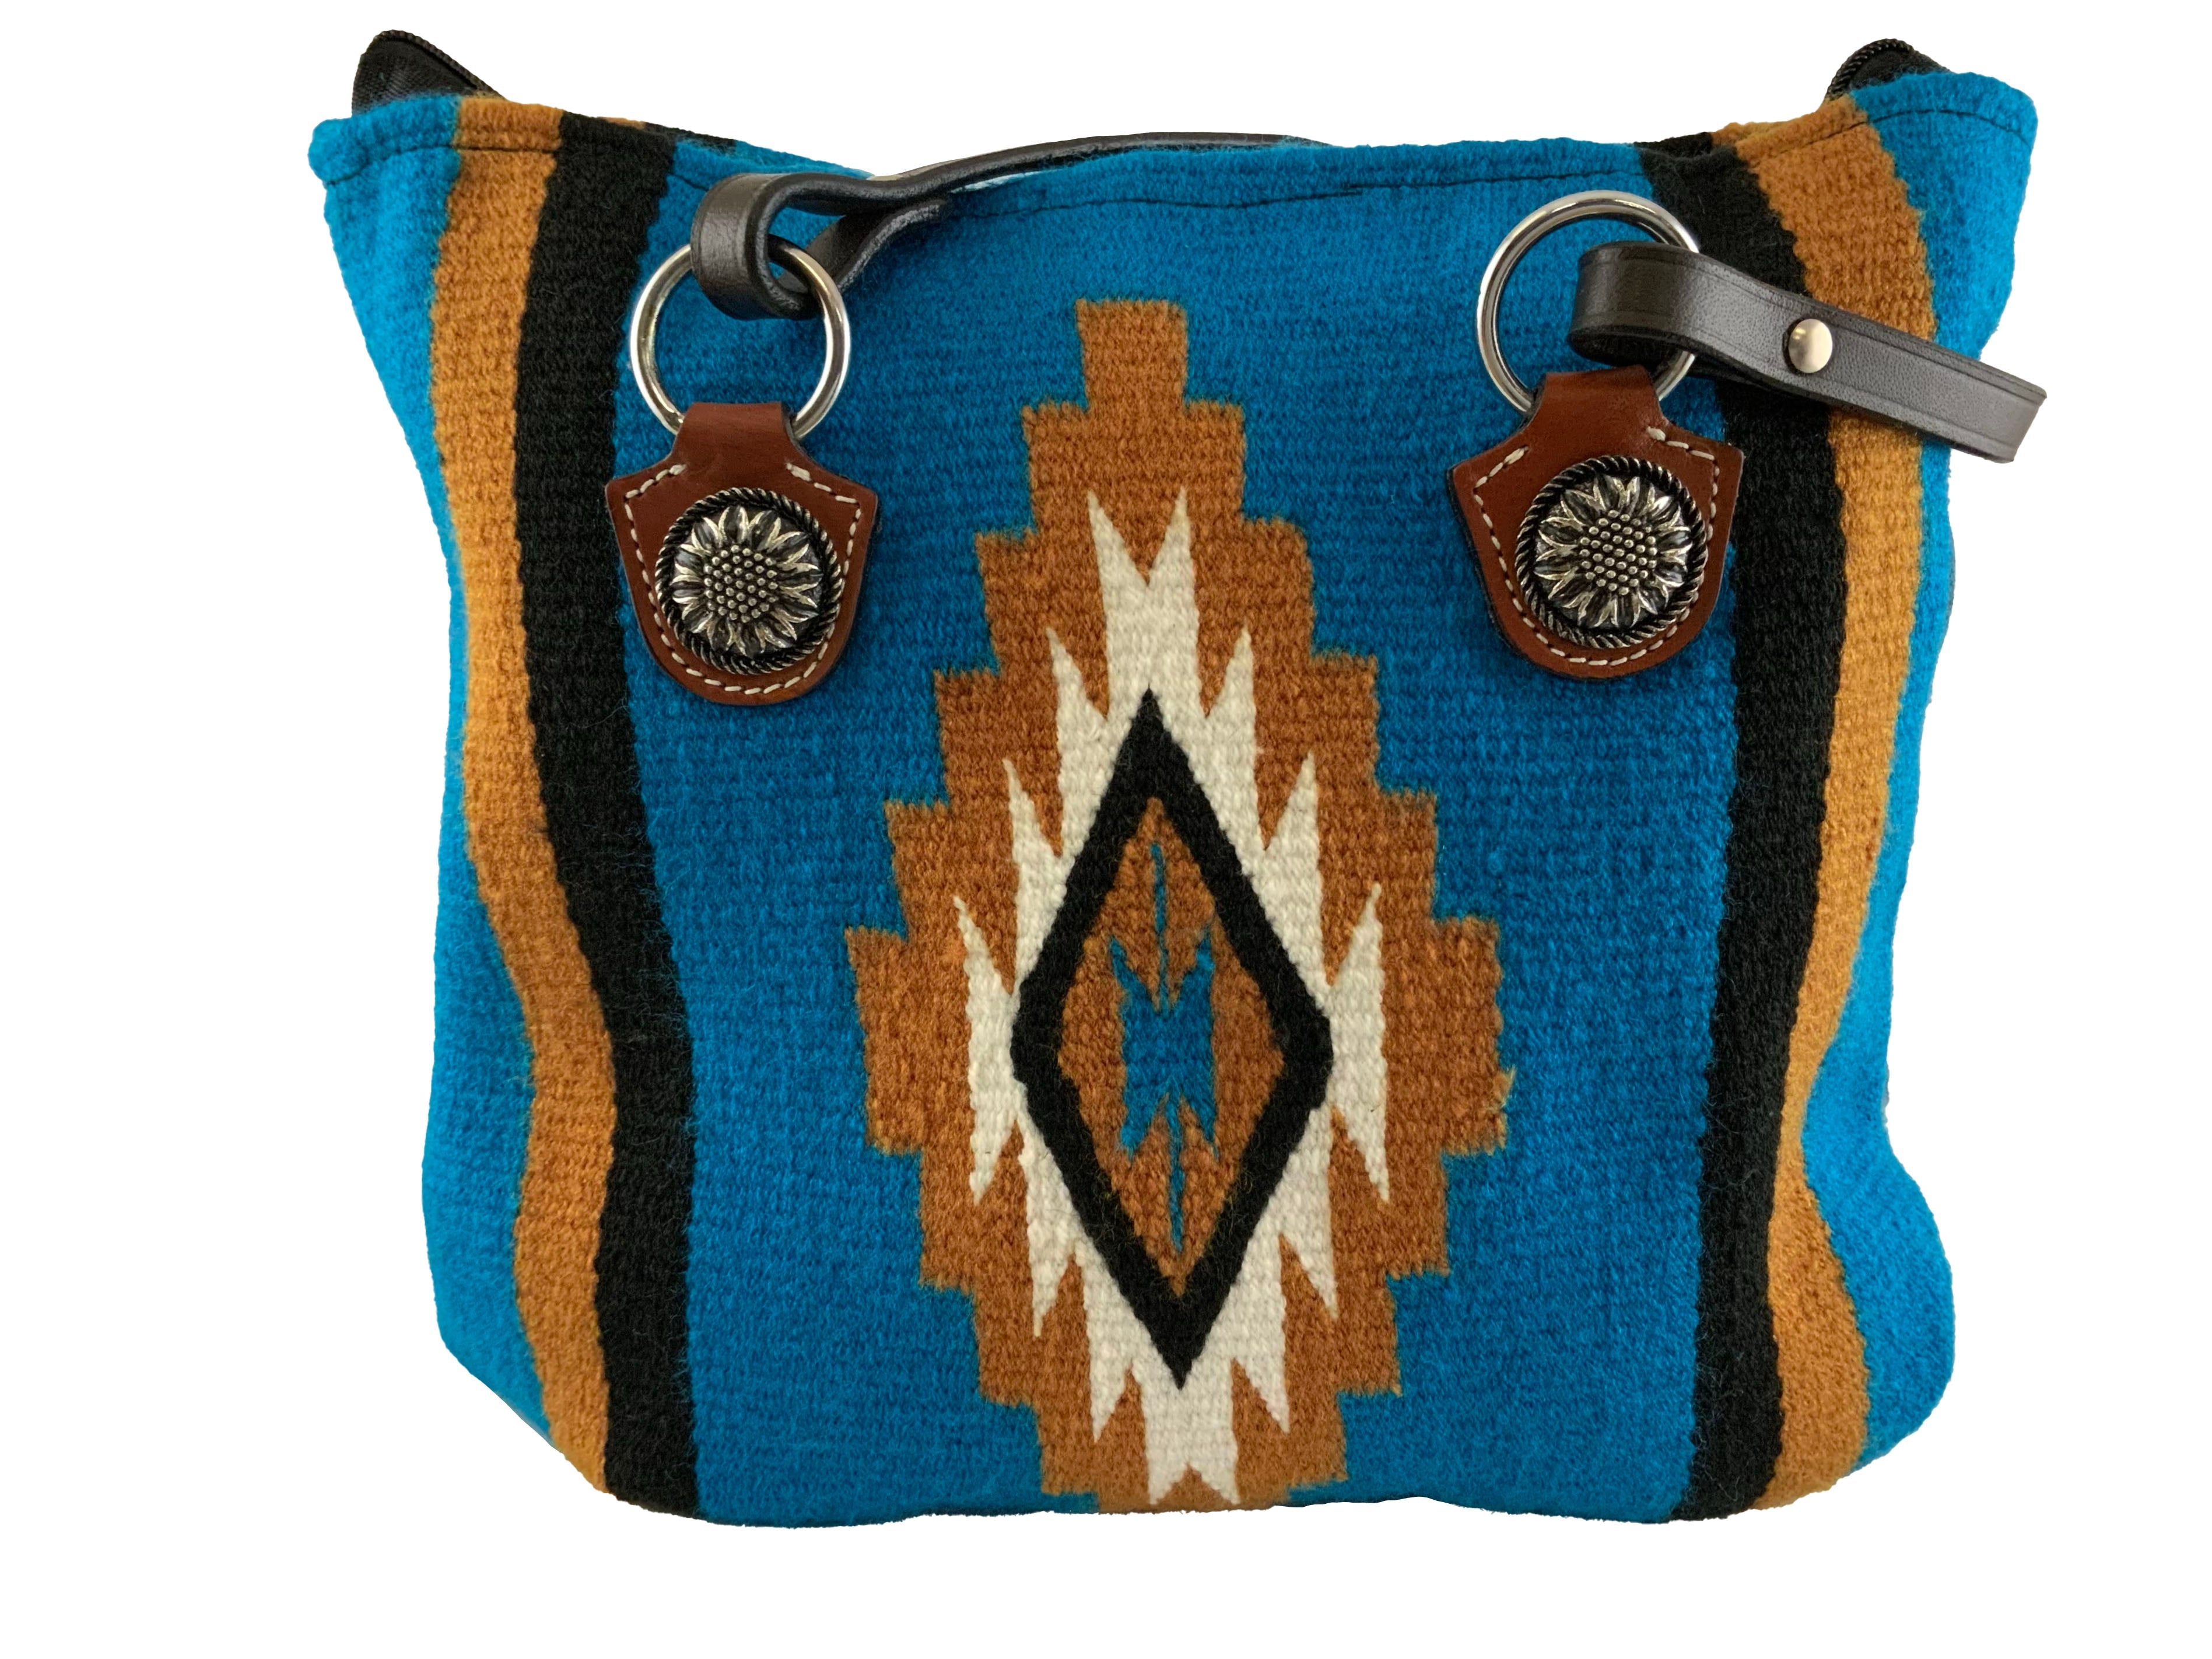 202618: Showman ® Southwest Saddle blanket handbag with genuine leather handle with sunflower conc Primary Showman   